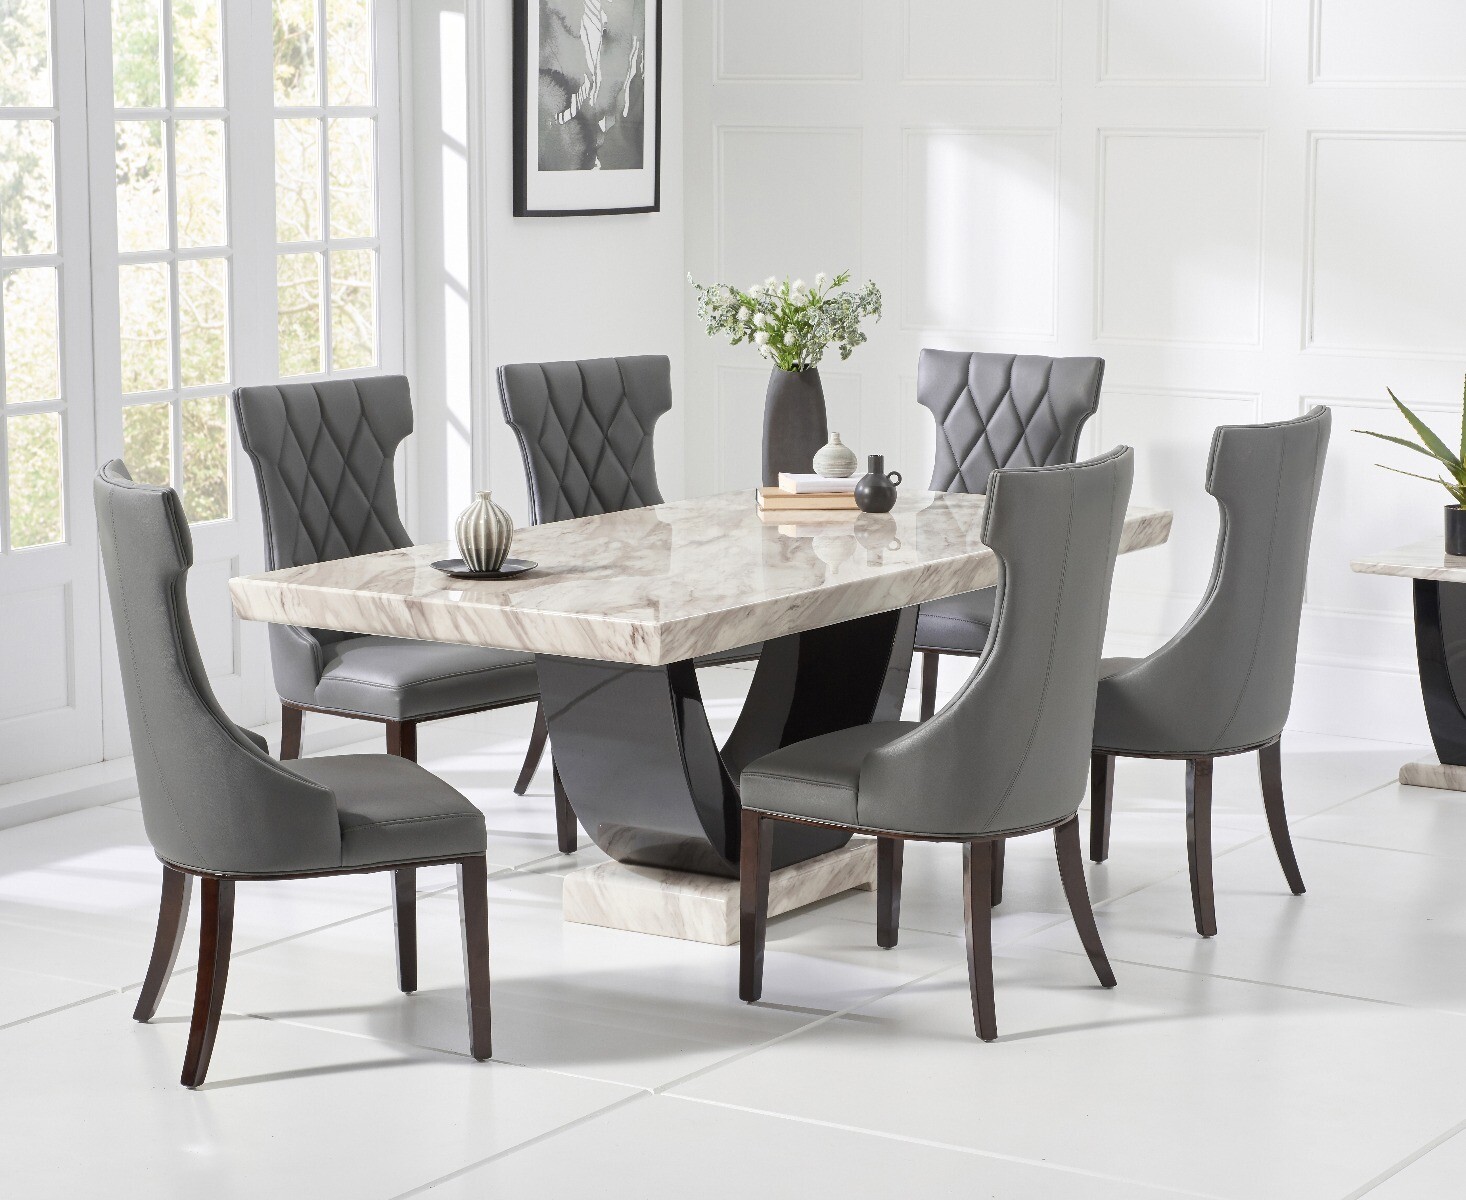 Raphael 170cm Cream And Black Pedestal Marble Dining Table With 4 Cream Sophia Chairs